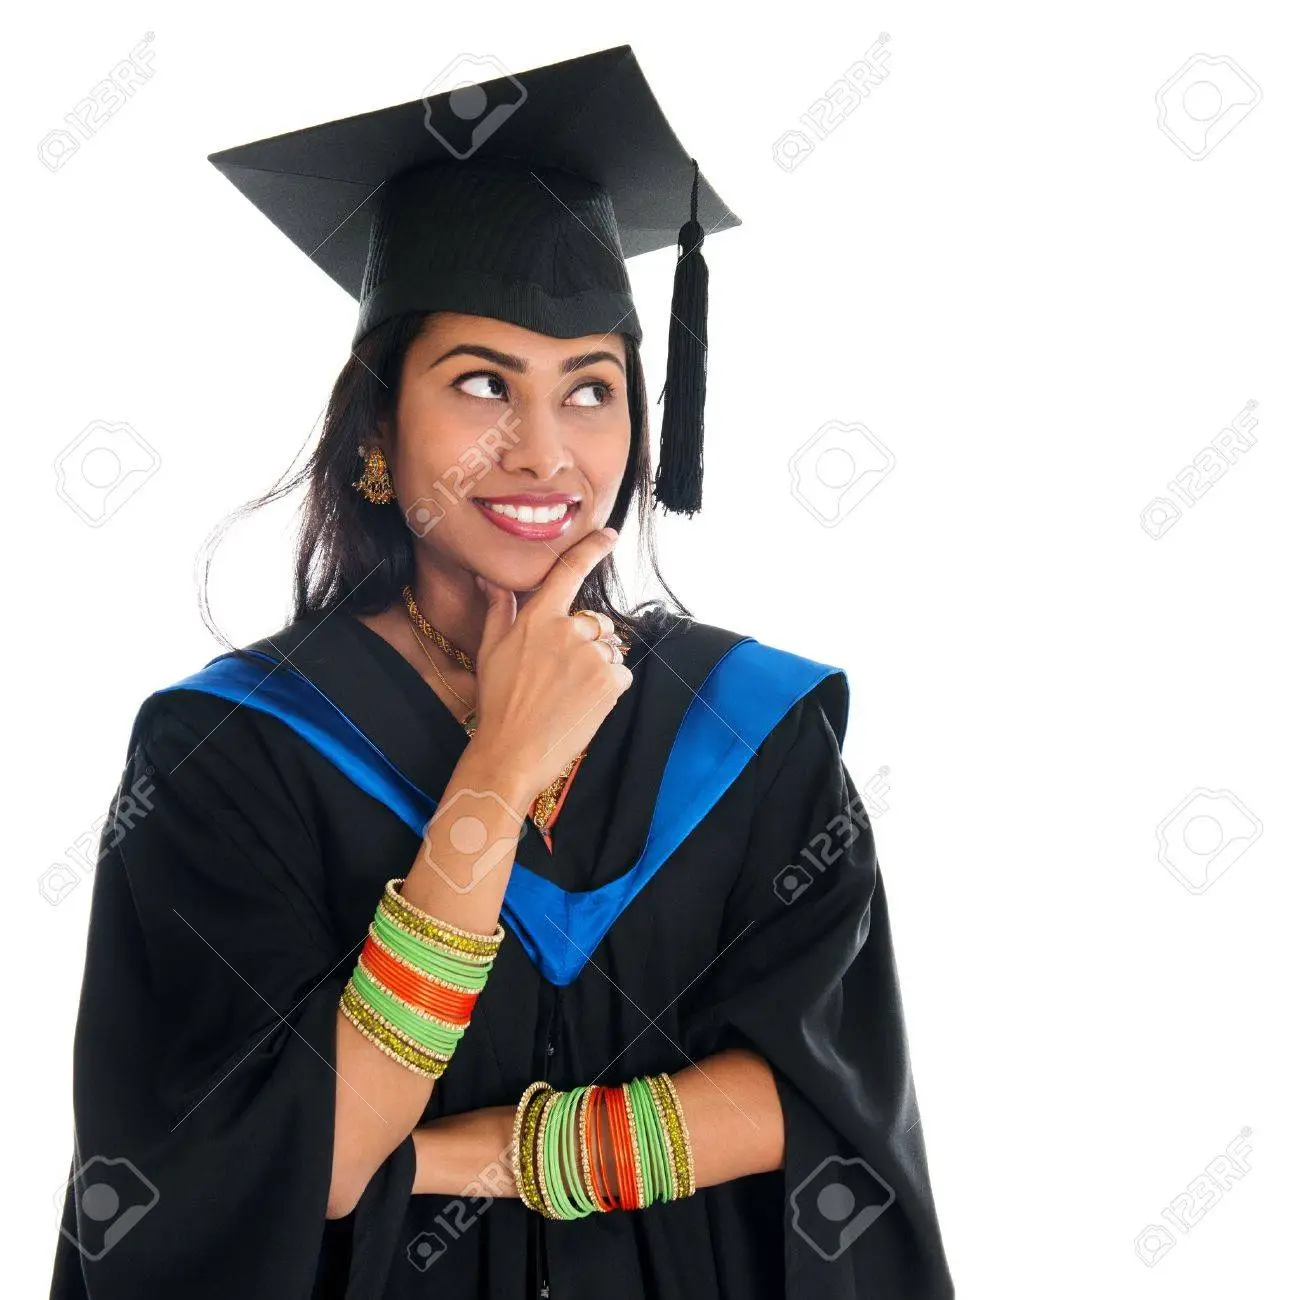 graduation gown : Happy Indian